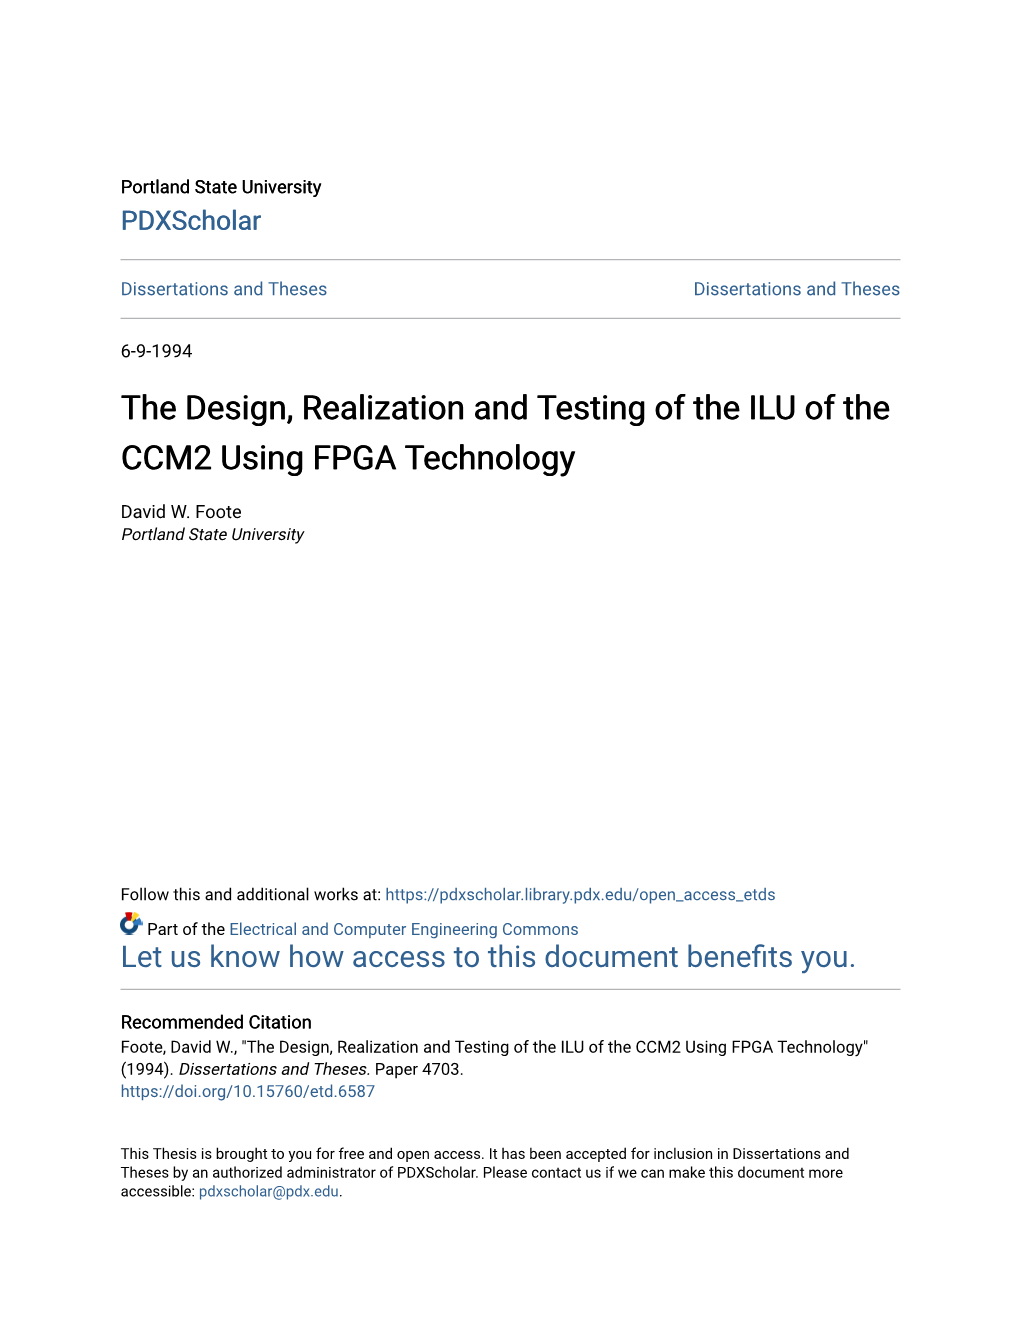 The Design, Realization and Testing of the ILU of the CCM2 Using FPGA Technology